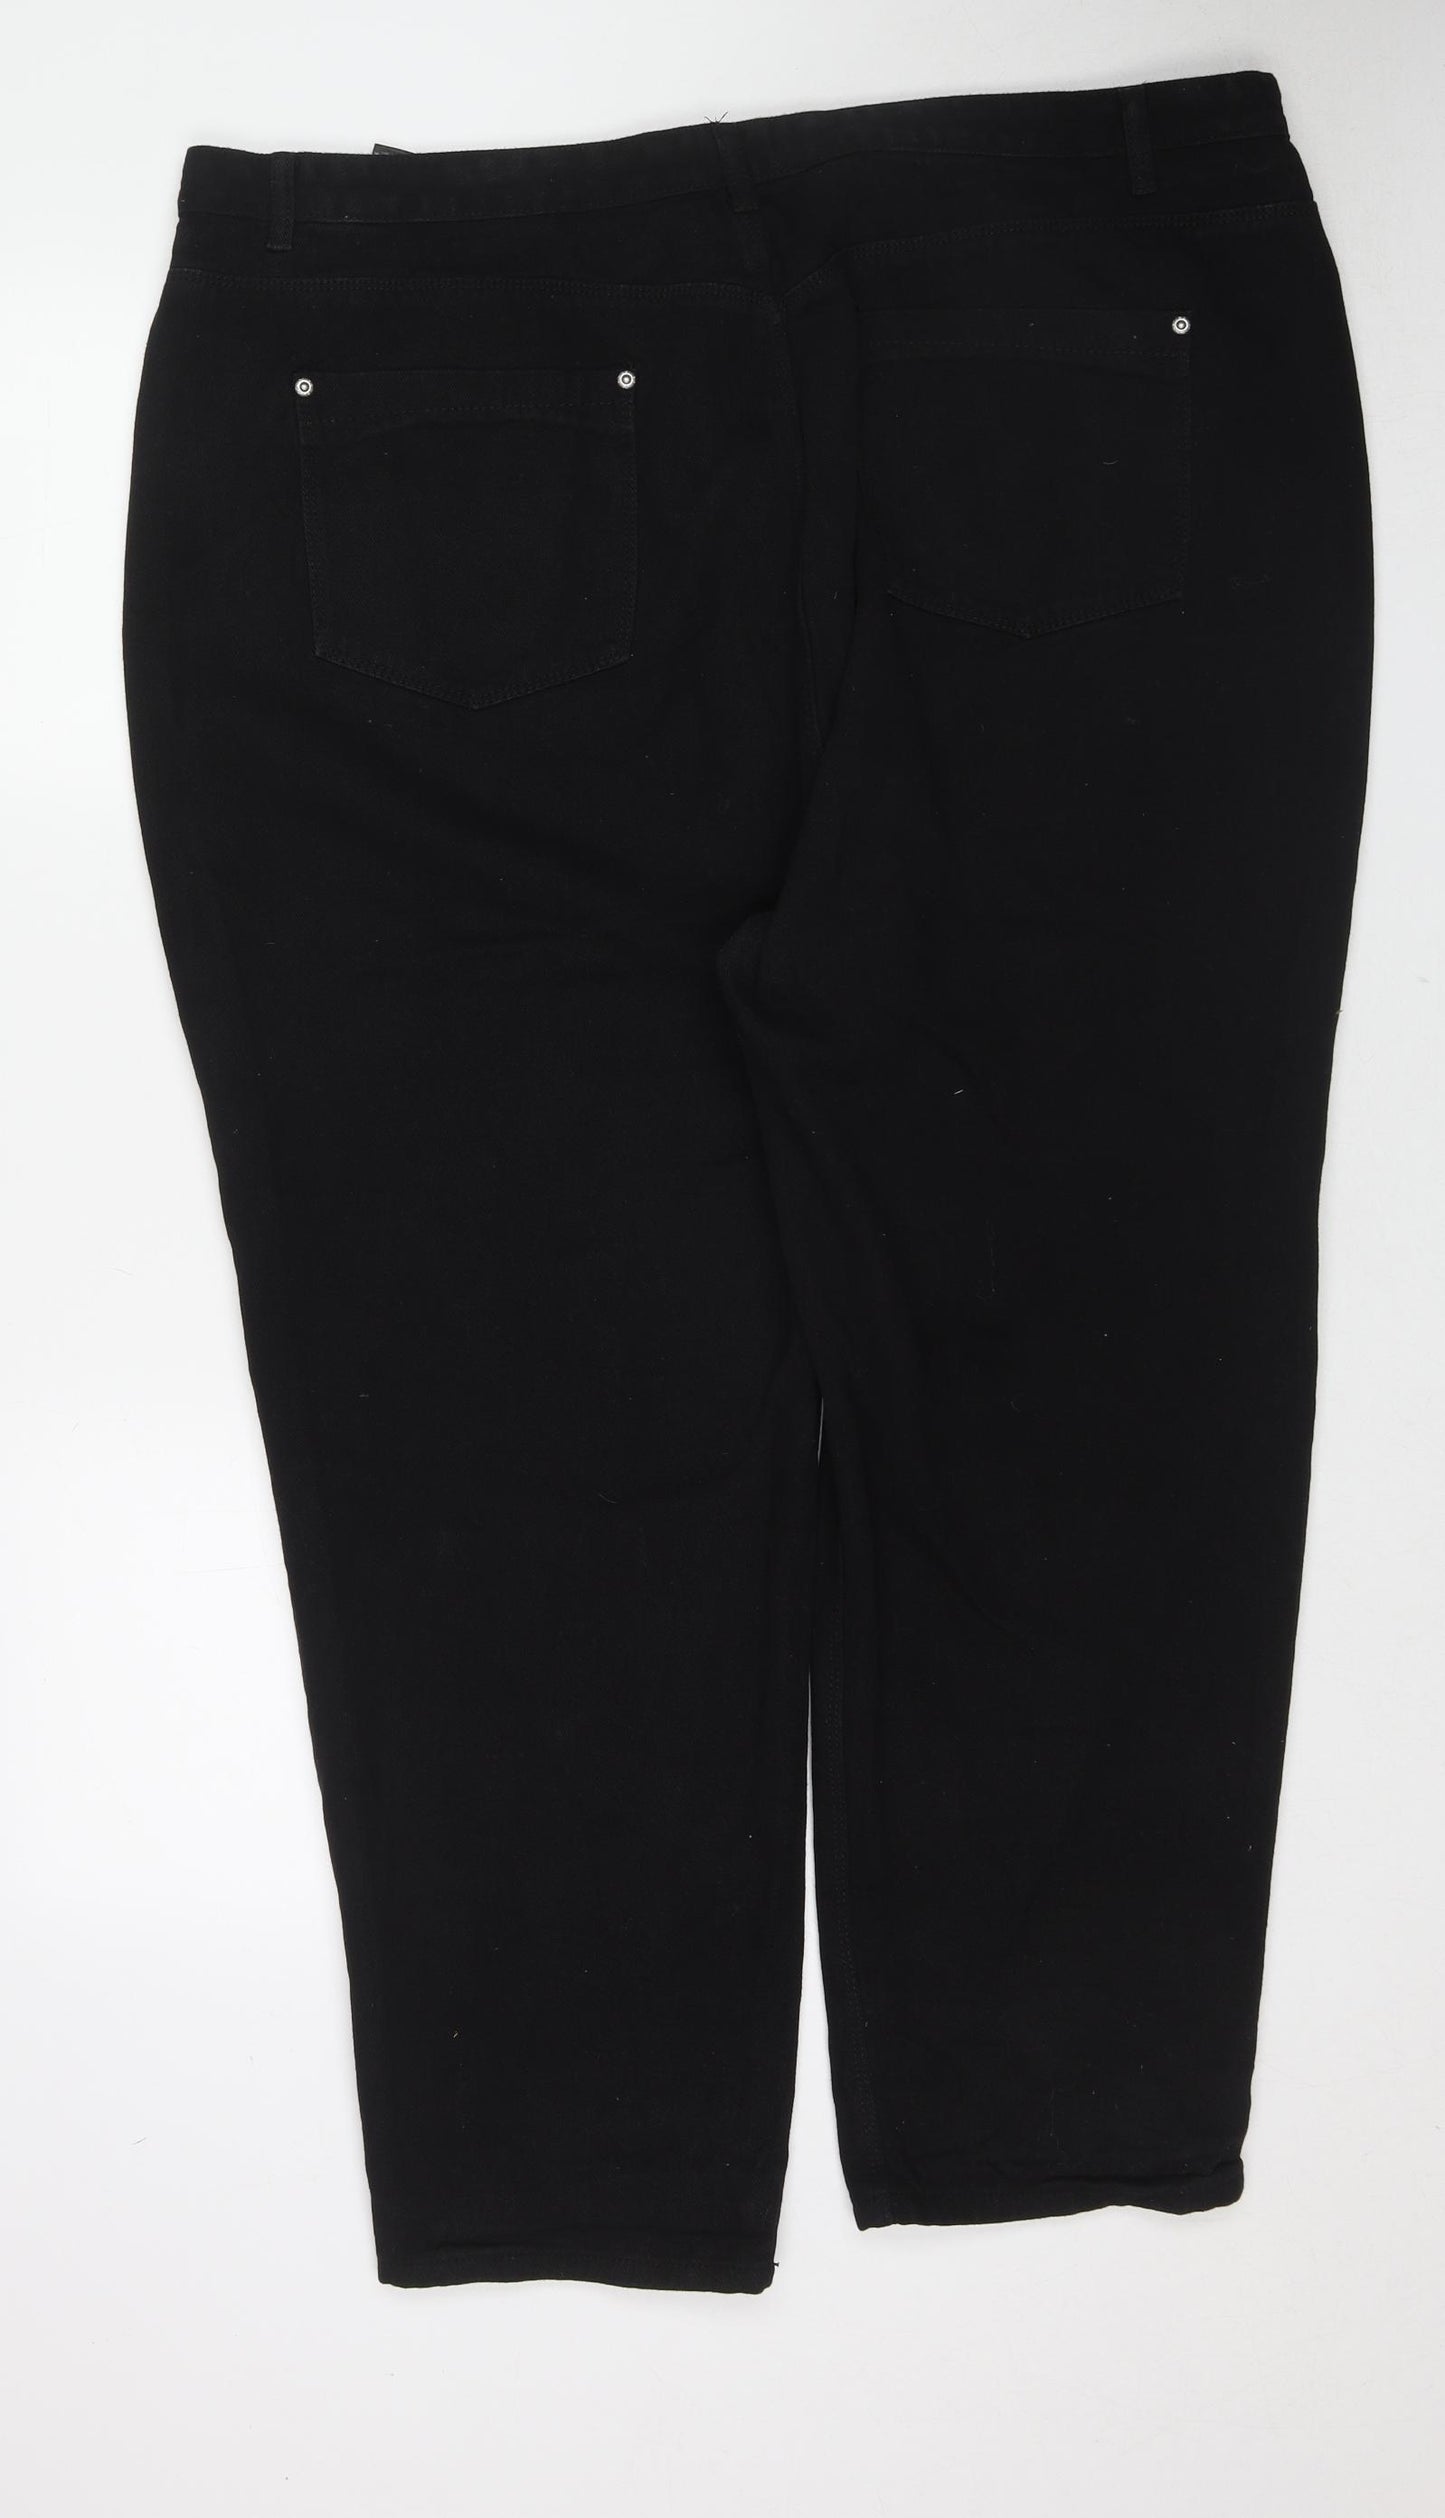 Yours Womens Black Cotton Cropped Jeans Size 24 Regular